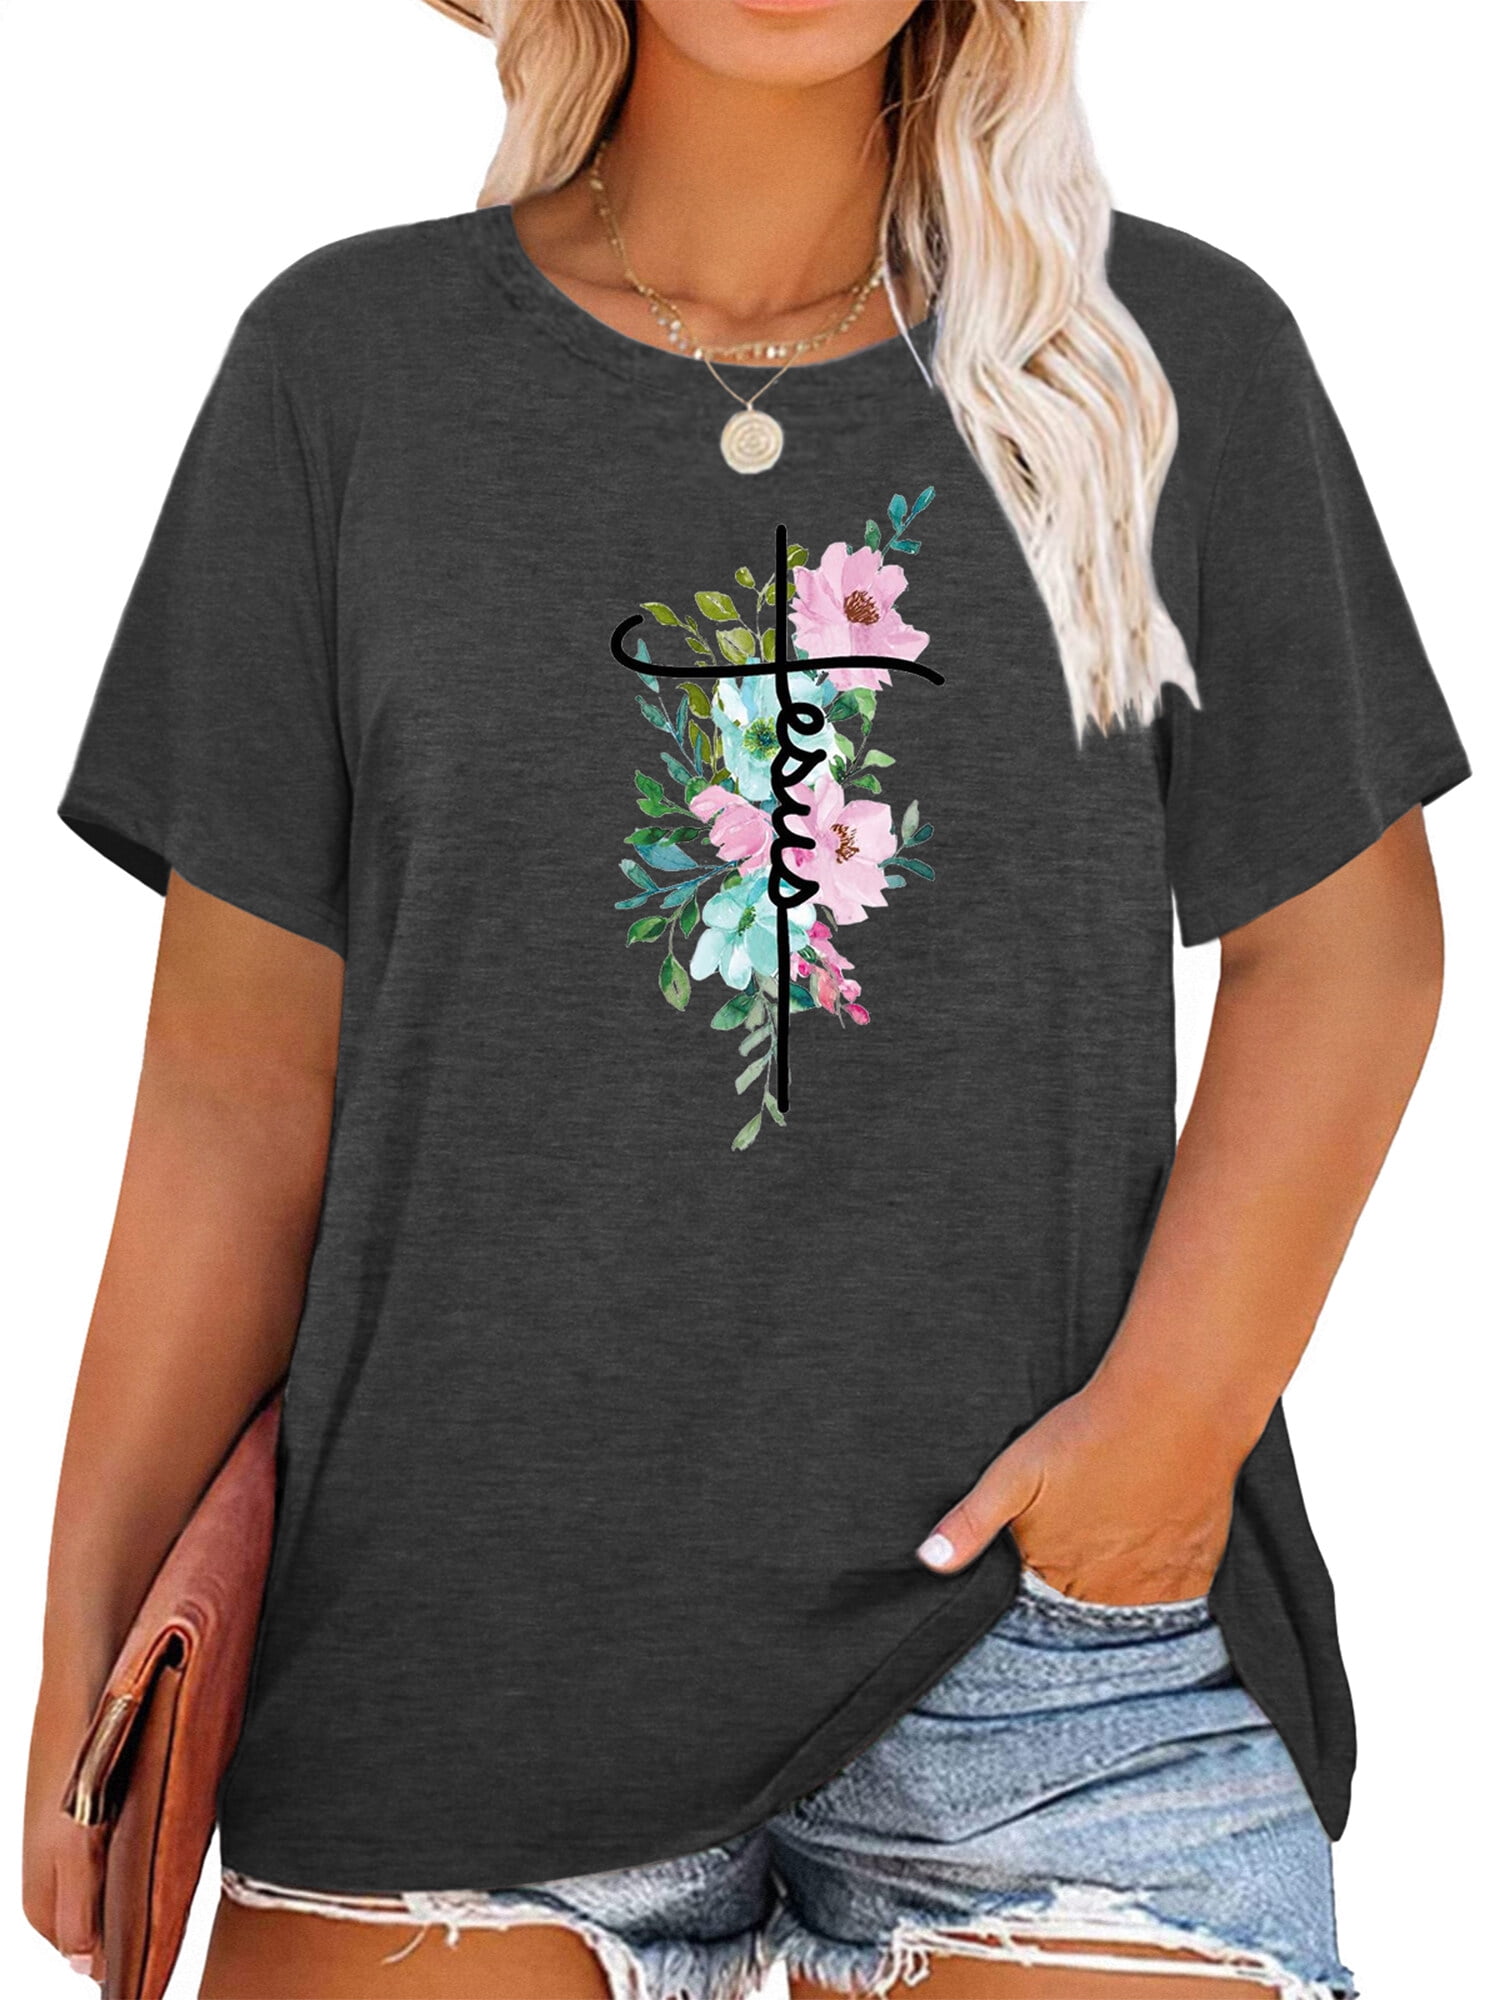 XCHQRTI Christian Shirts for Women Plus Graphic Religous Tops Blessed ...